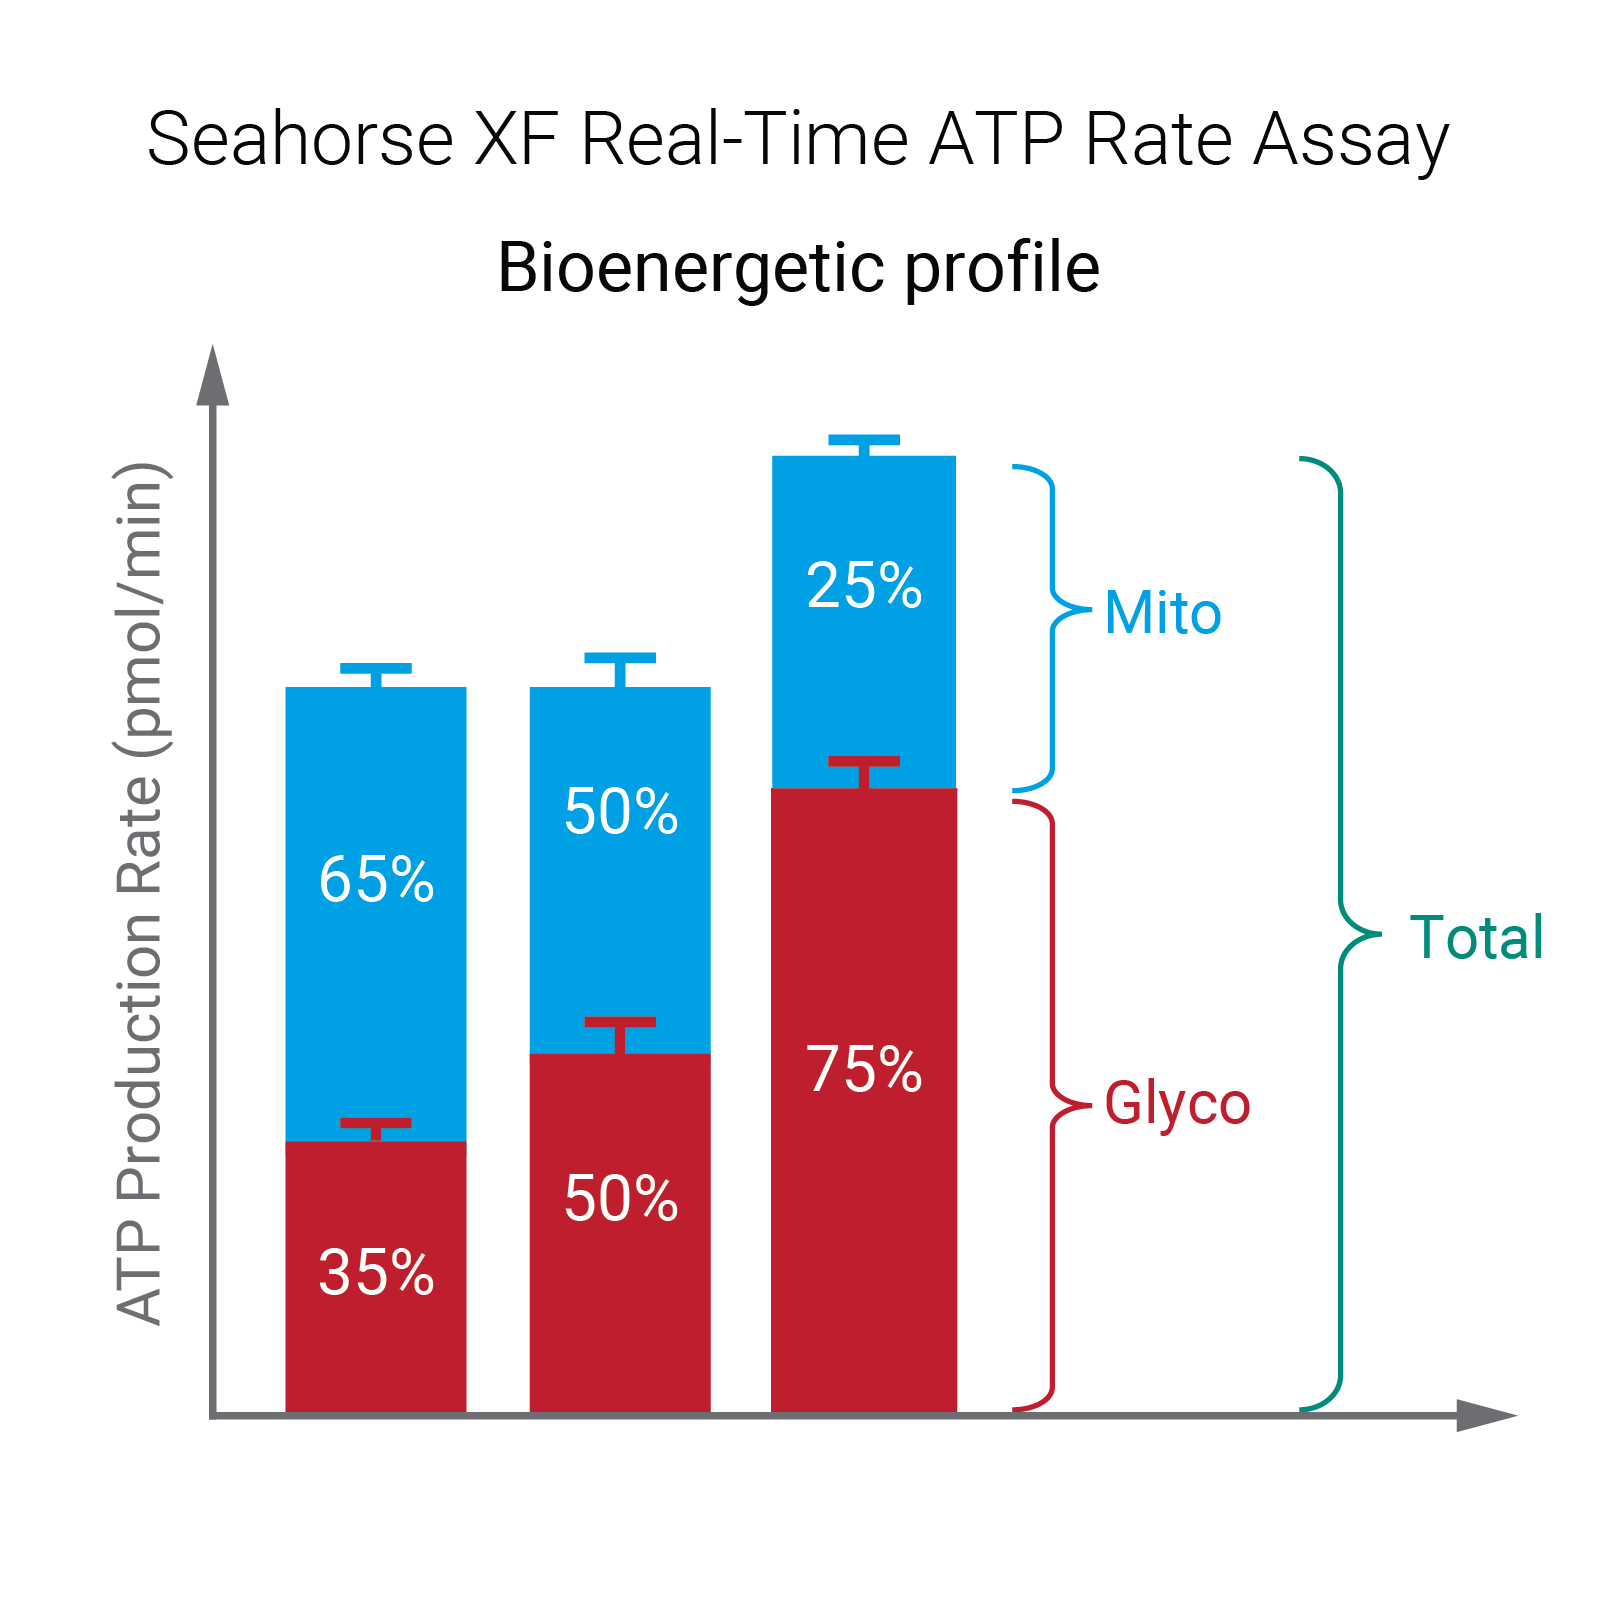 Seahorse XF Real-Time ATP Rate Assay 키트